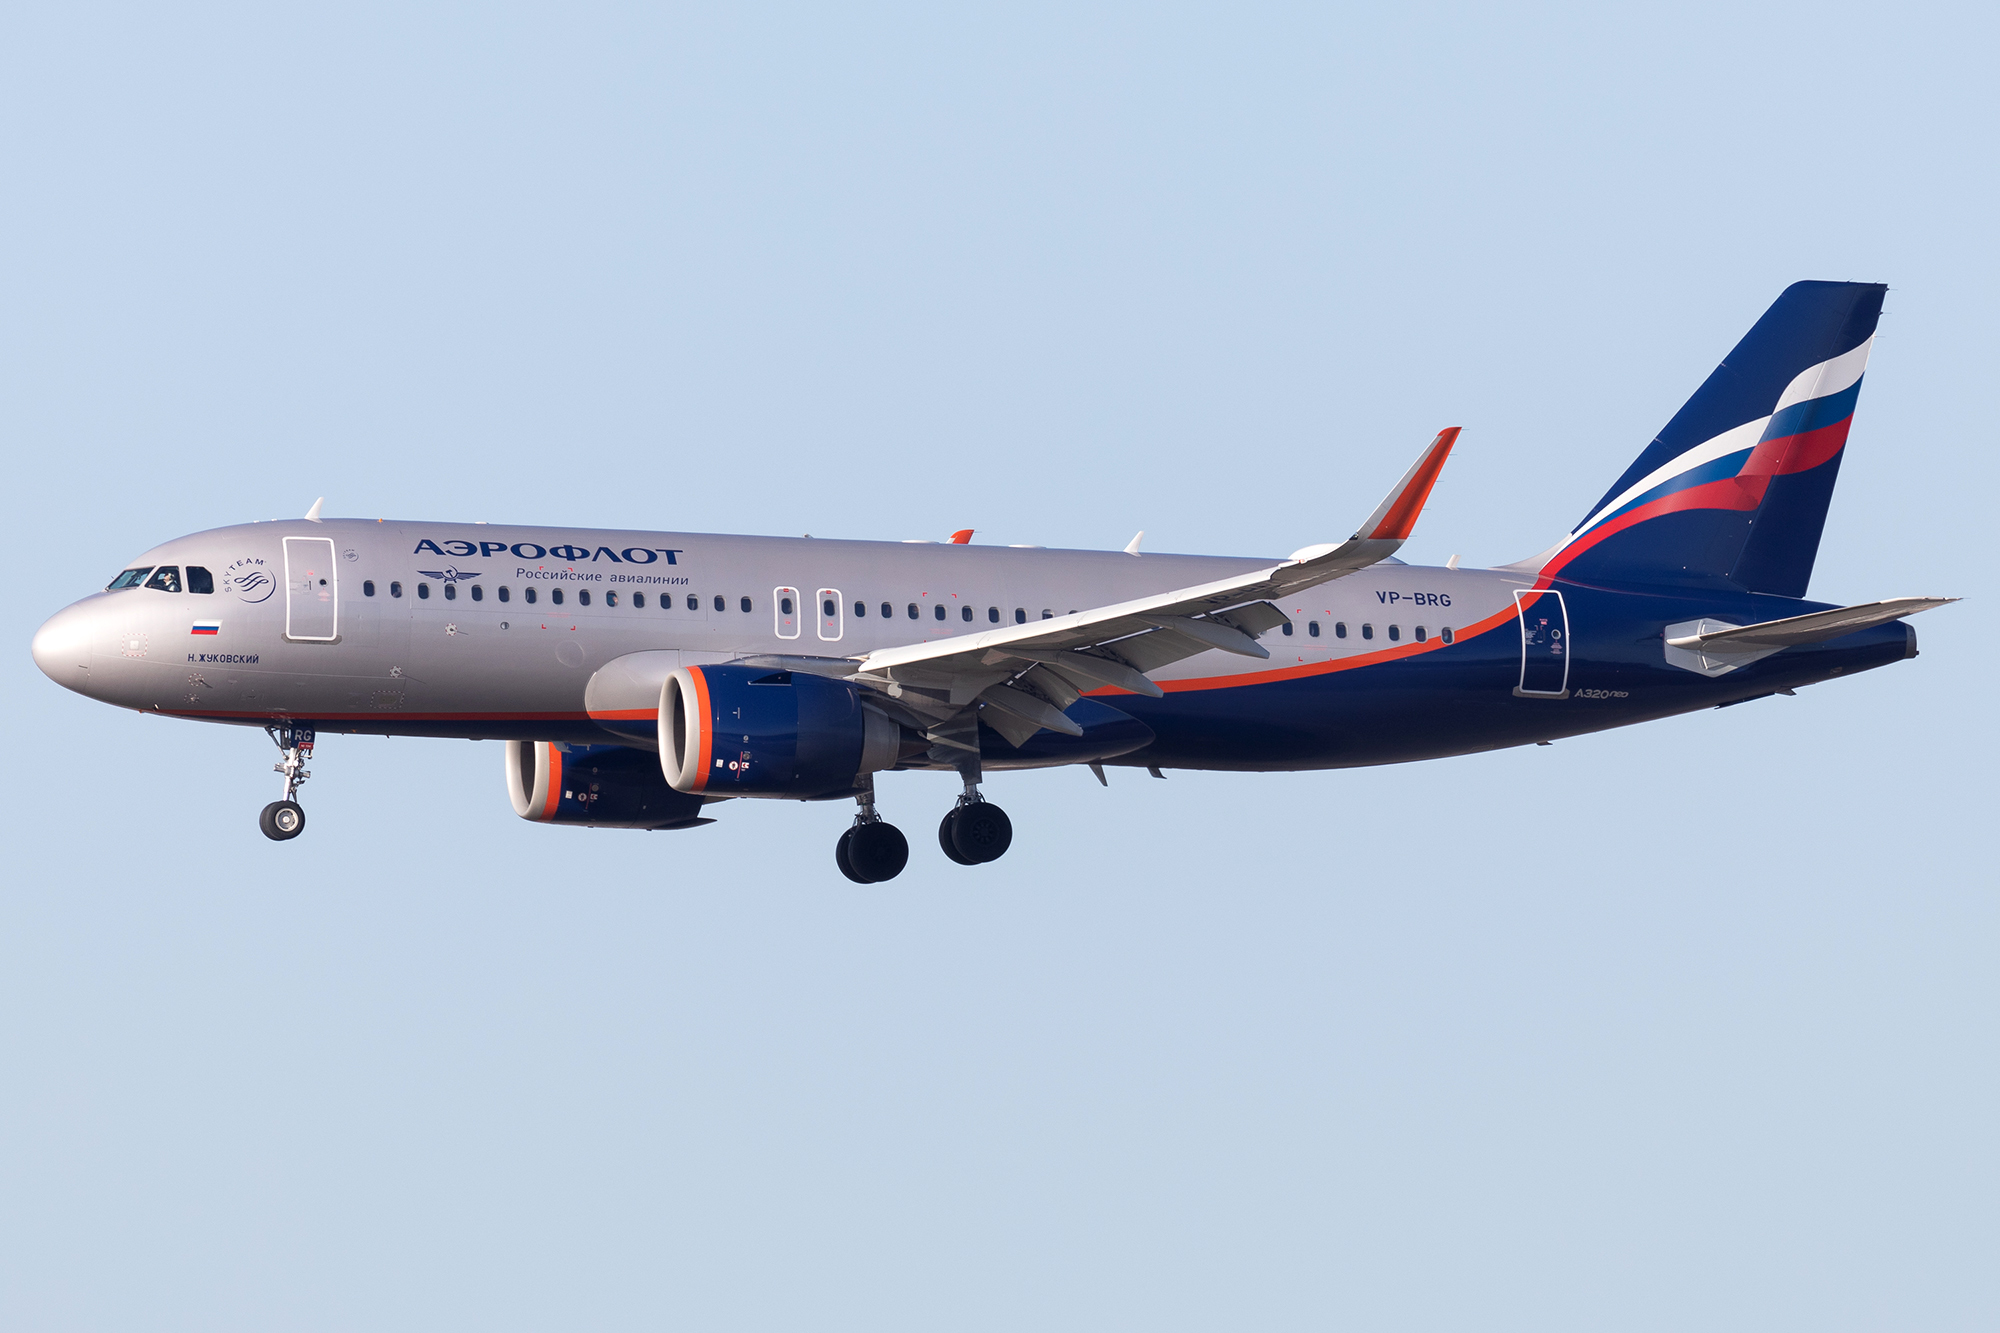 An Aeroflot Russian Airlines plane arrives at Frankfurt Airport in Germany, on February 23.